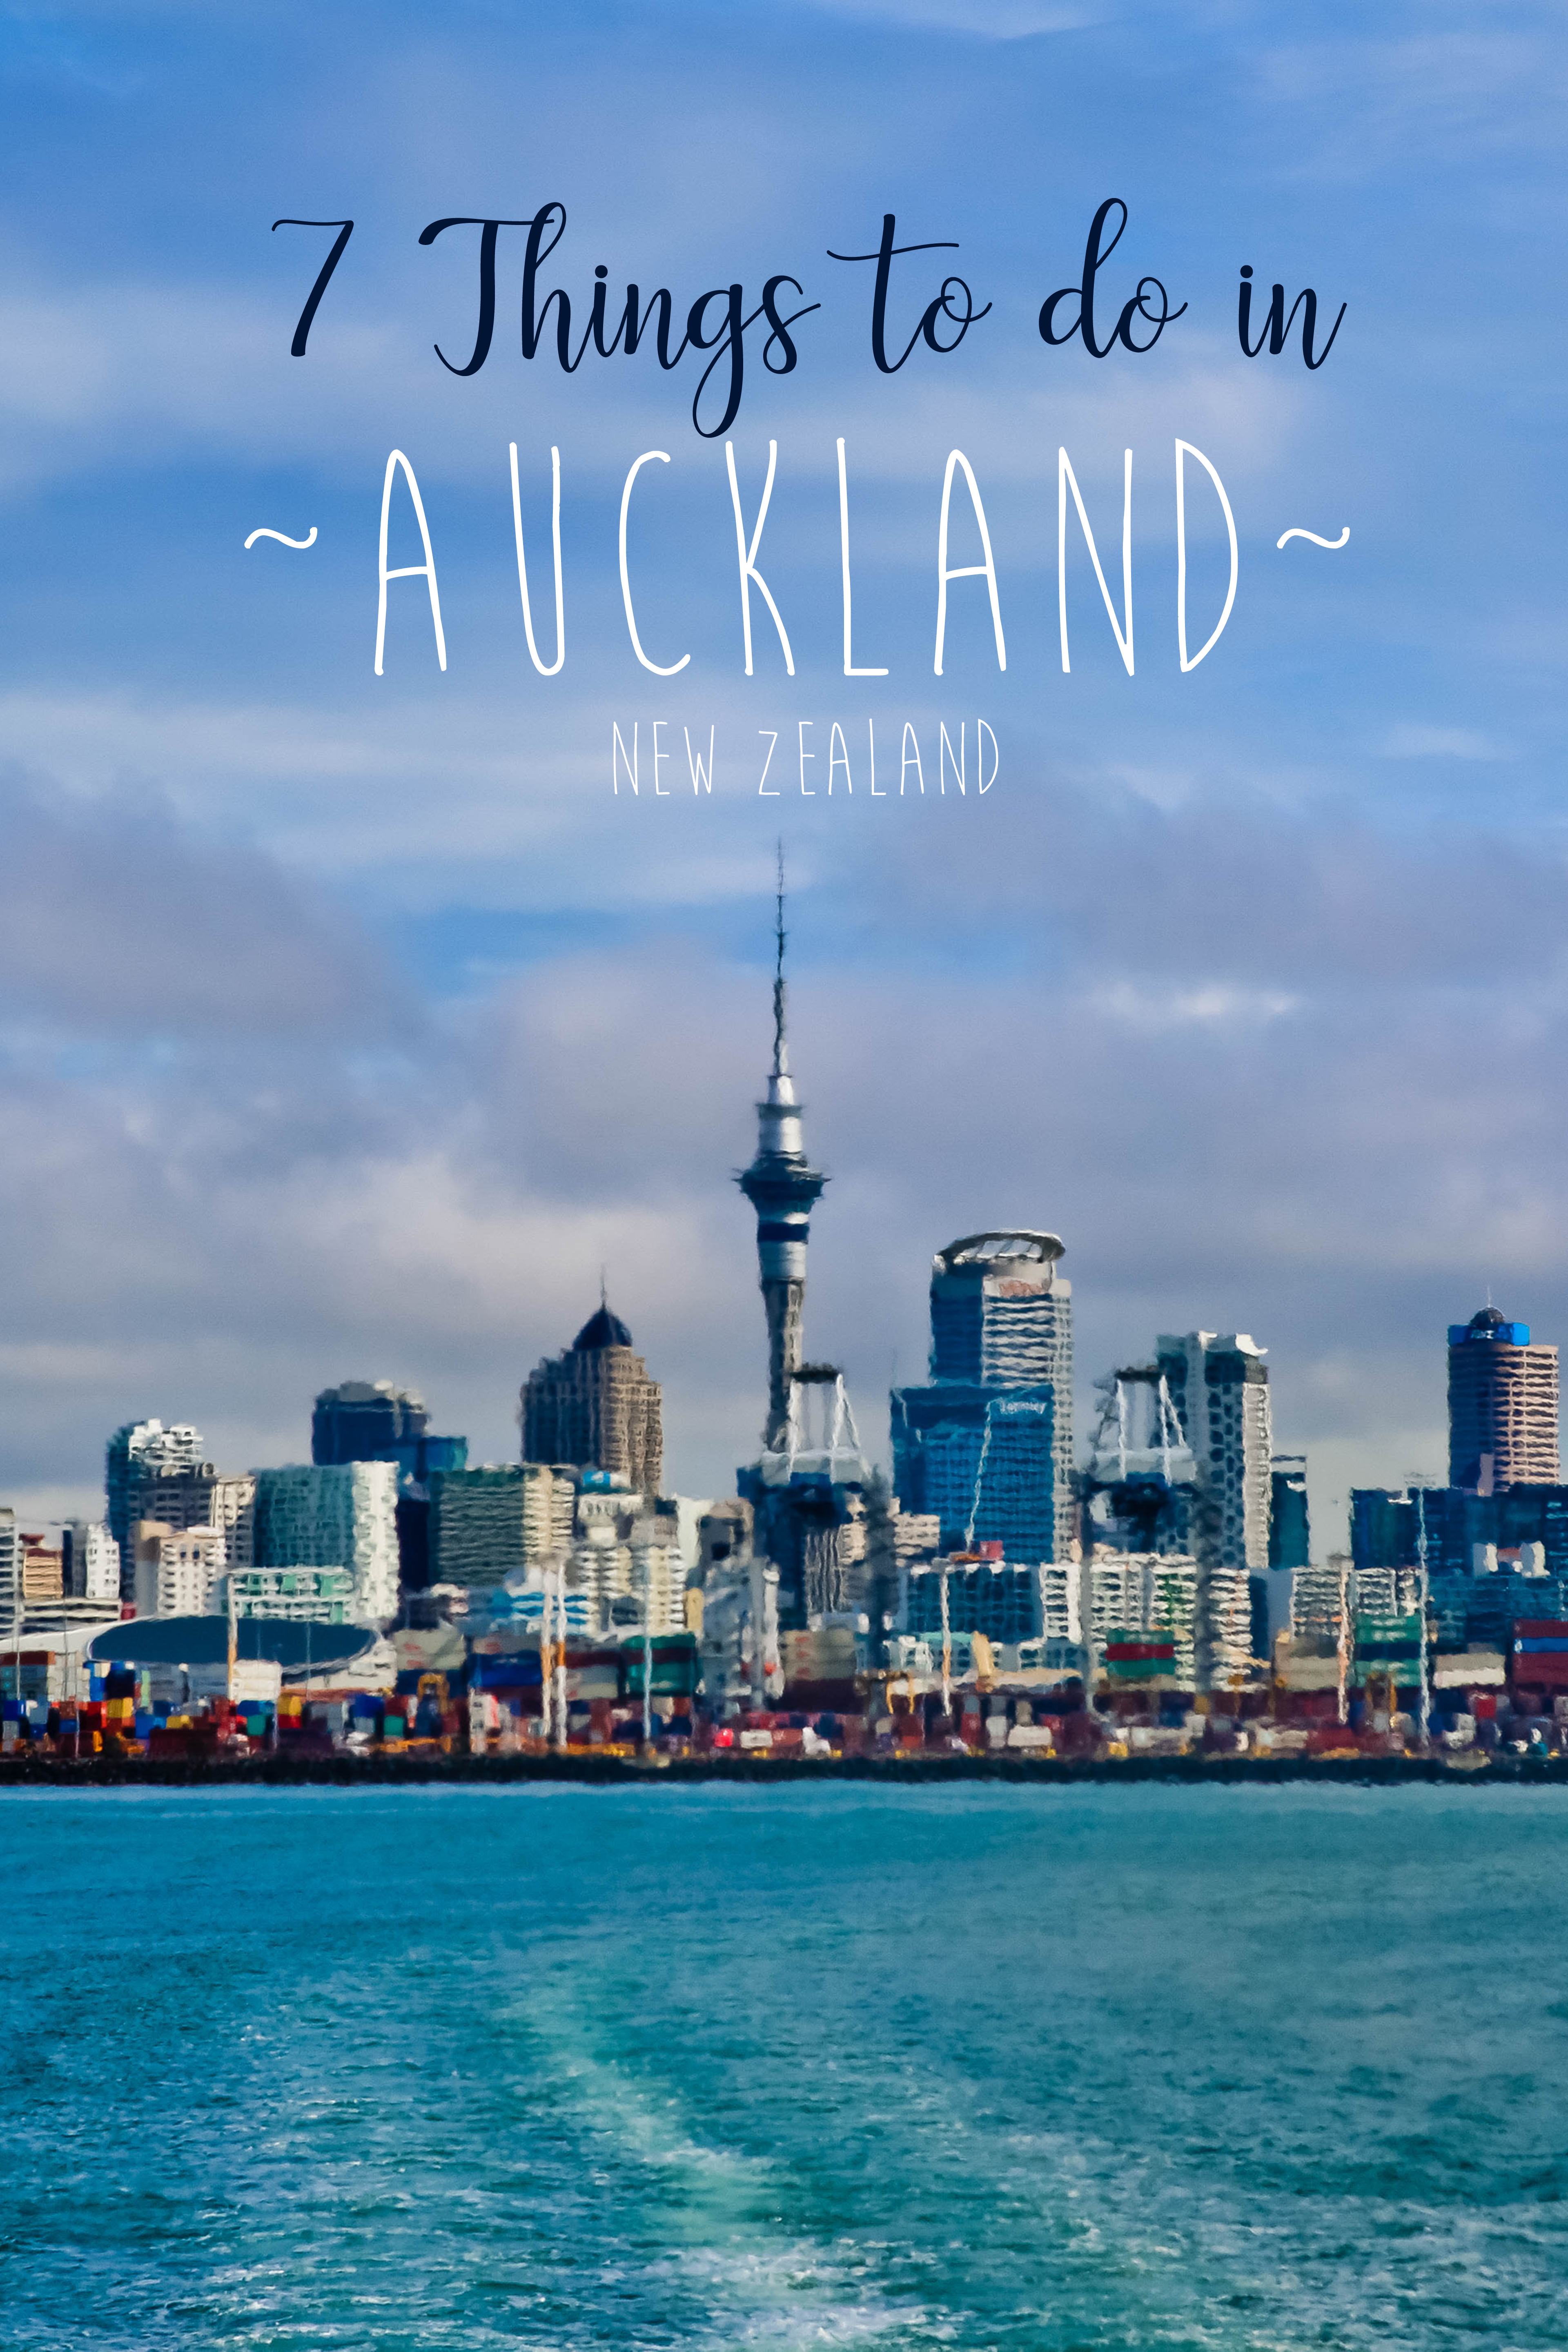 7 Things to Do in Auckland, New Zealand